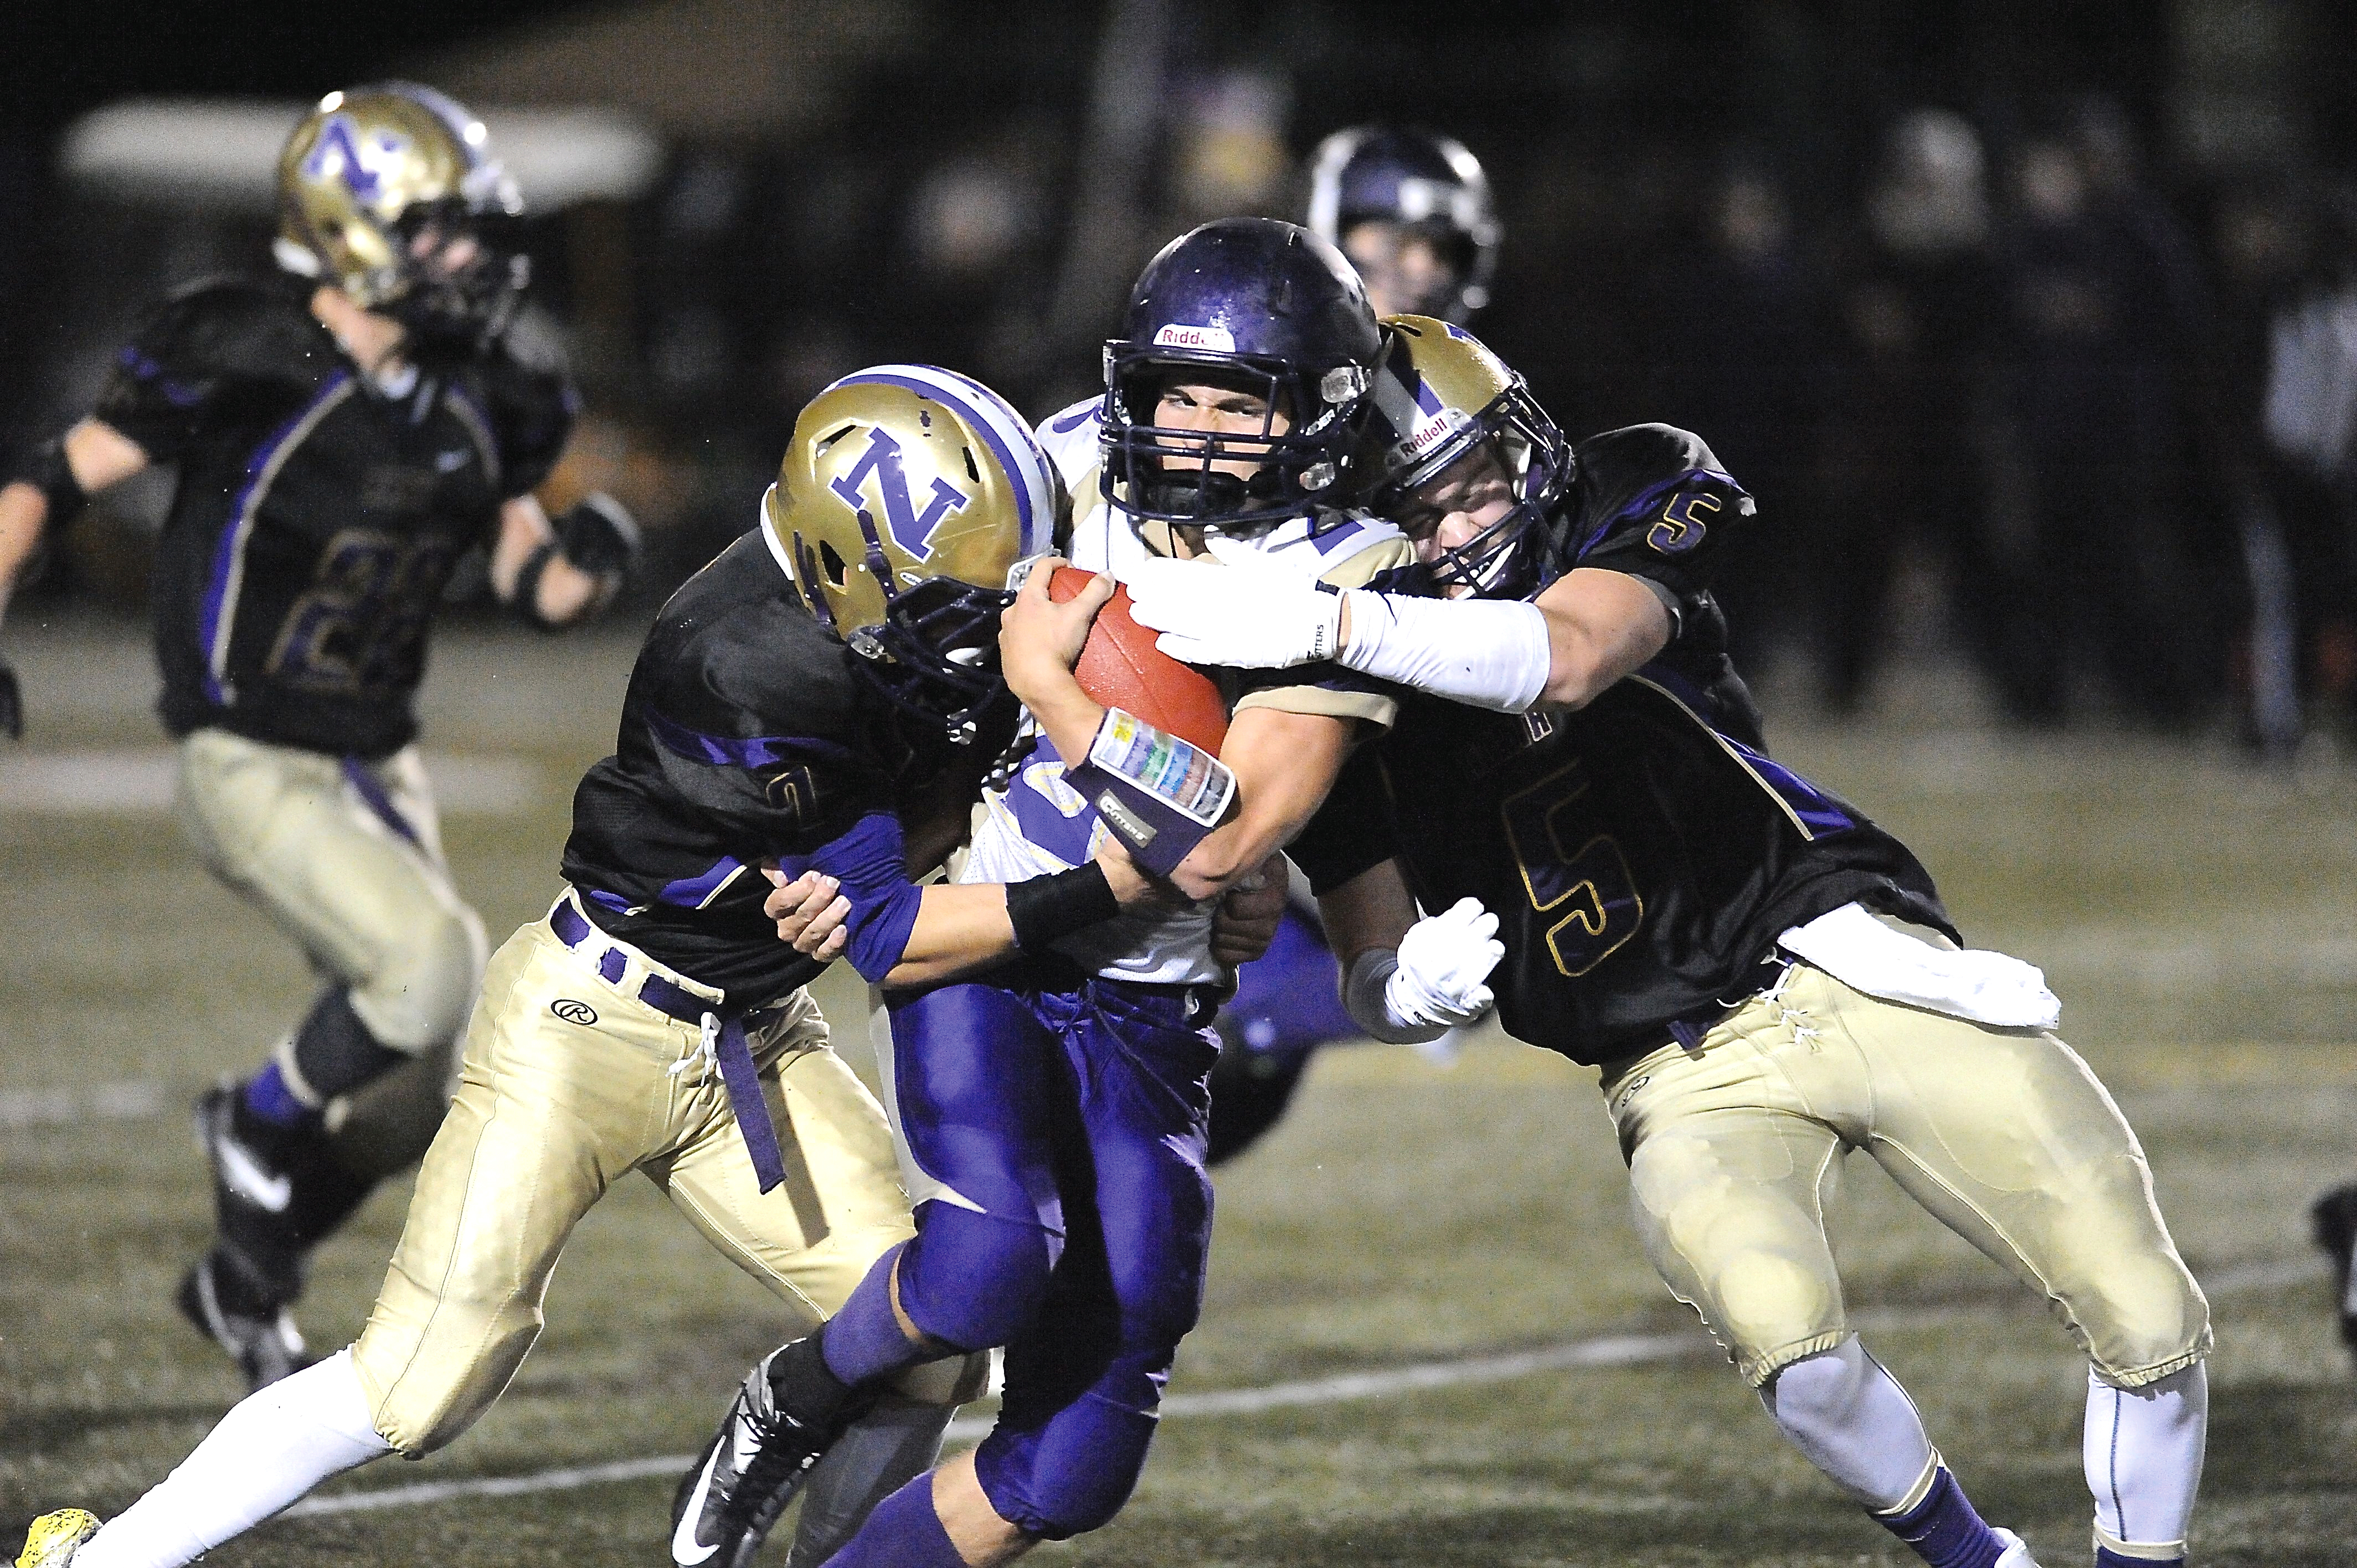 Sequim's Ty Jones is stopped by North Kitsap's Leif Klinger